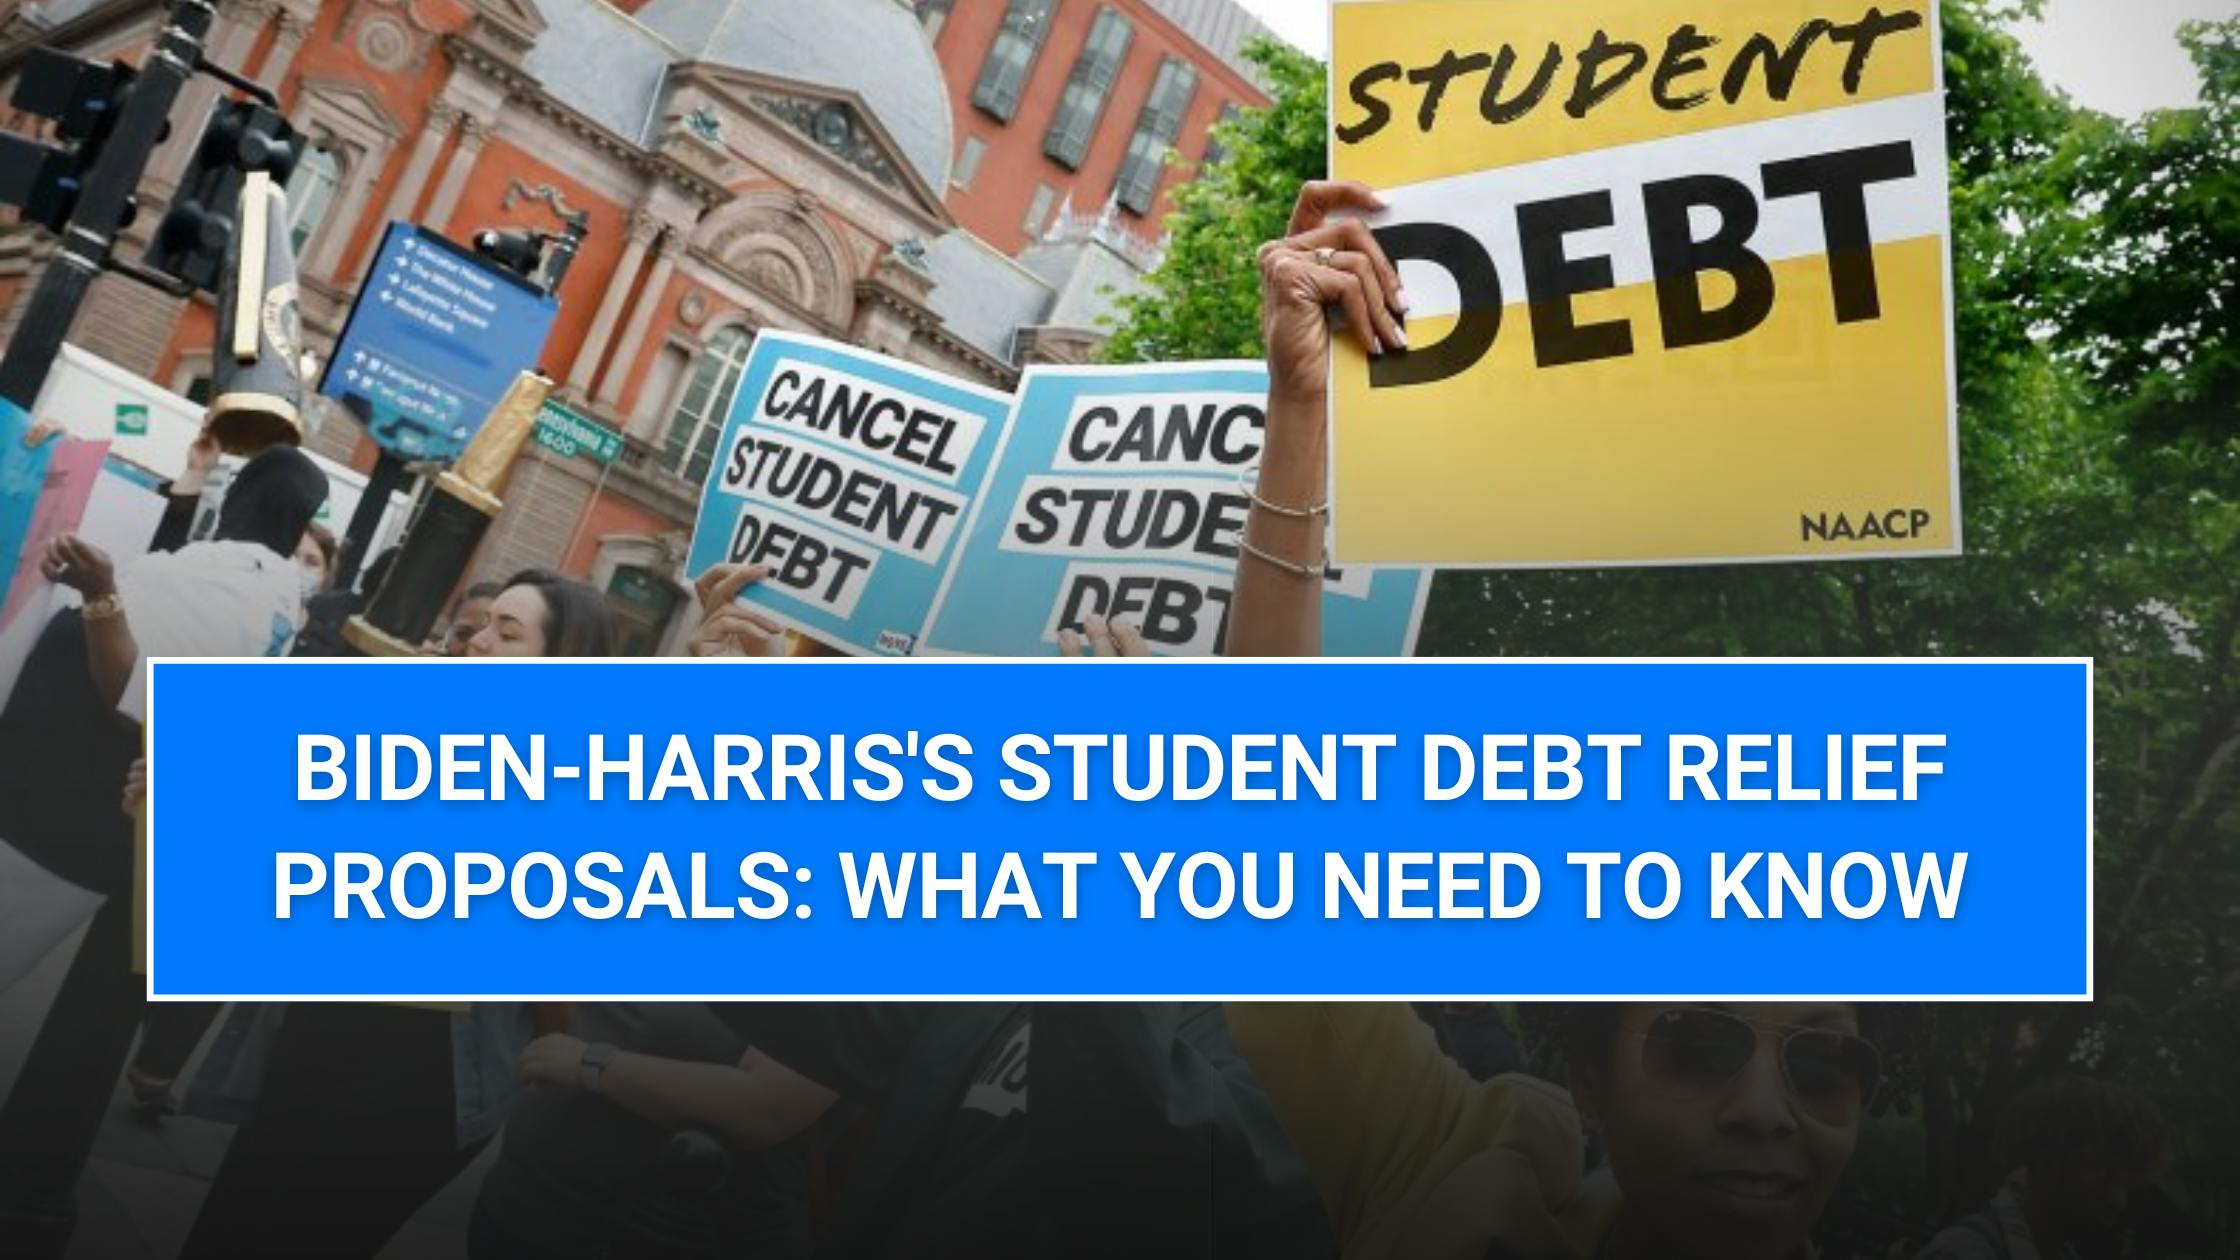 Biden-Harris's Student Debt Relief Proposals: What You Need to Know